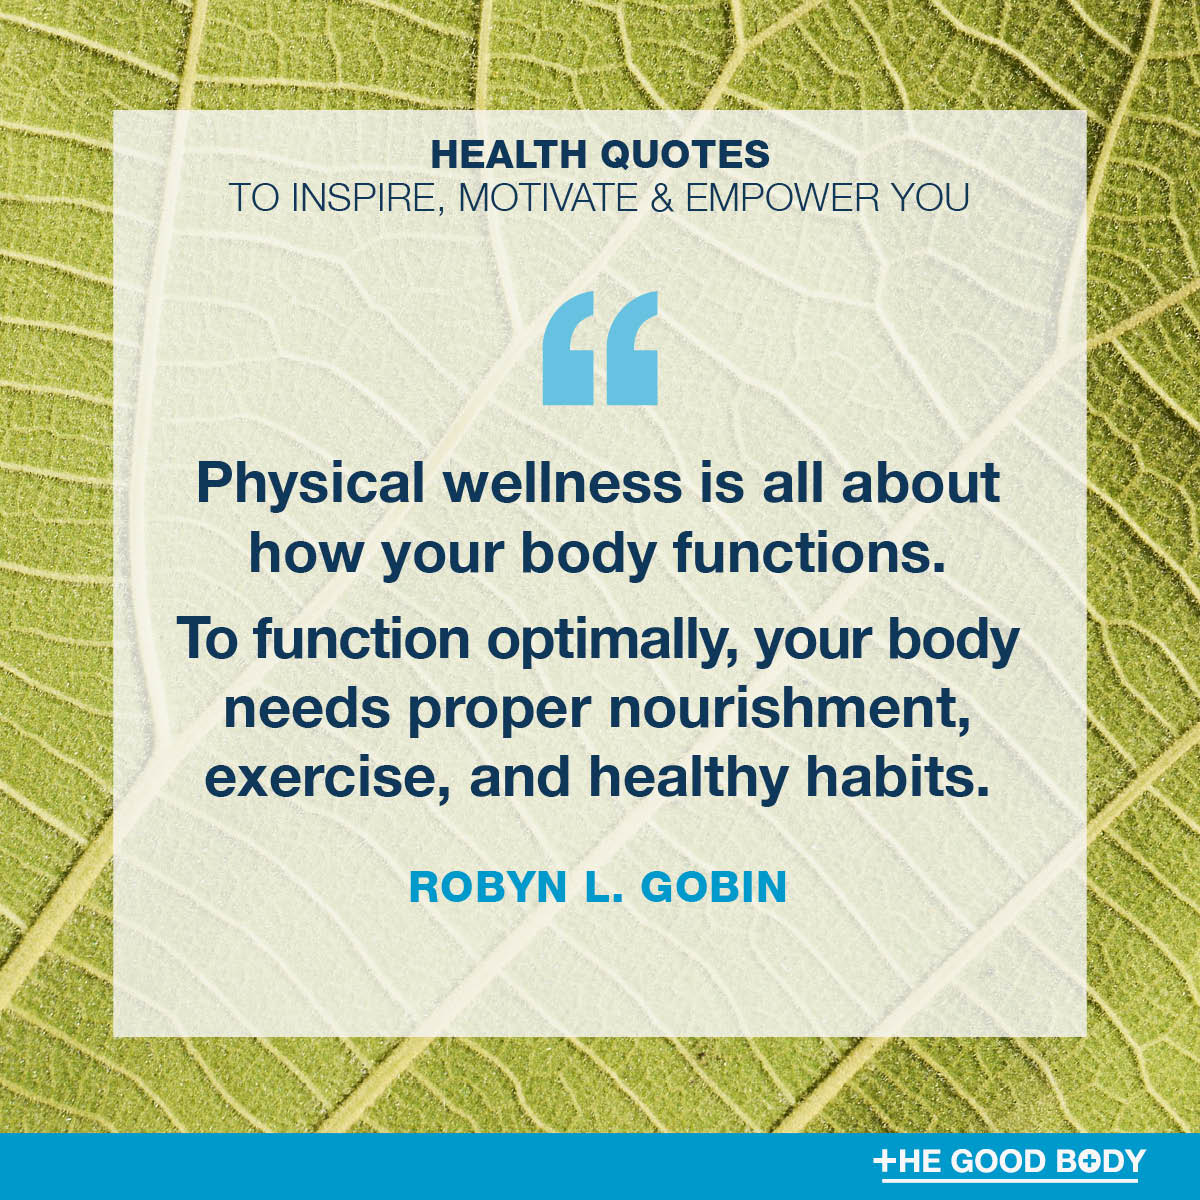 Positive Health Quotes #6 by Robyn L. Gobin